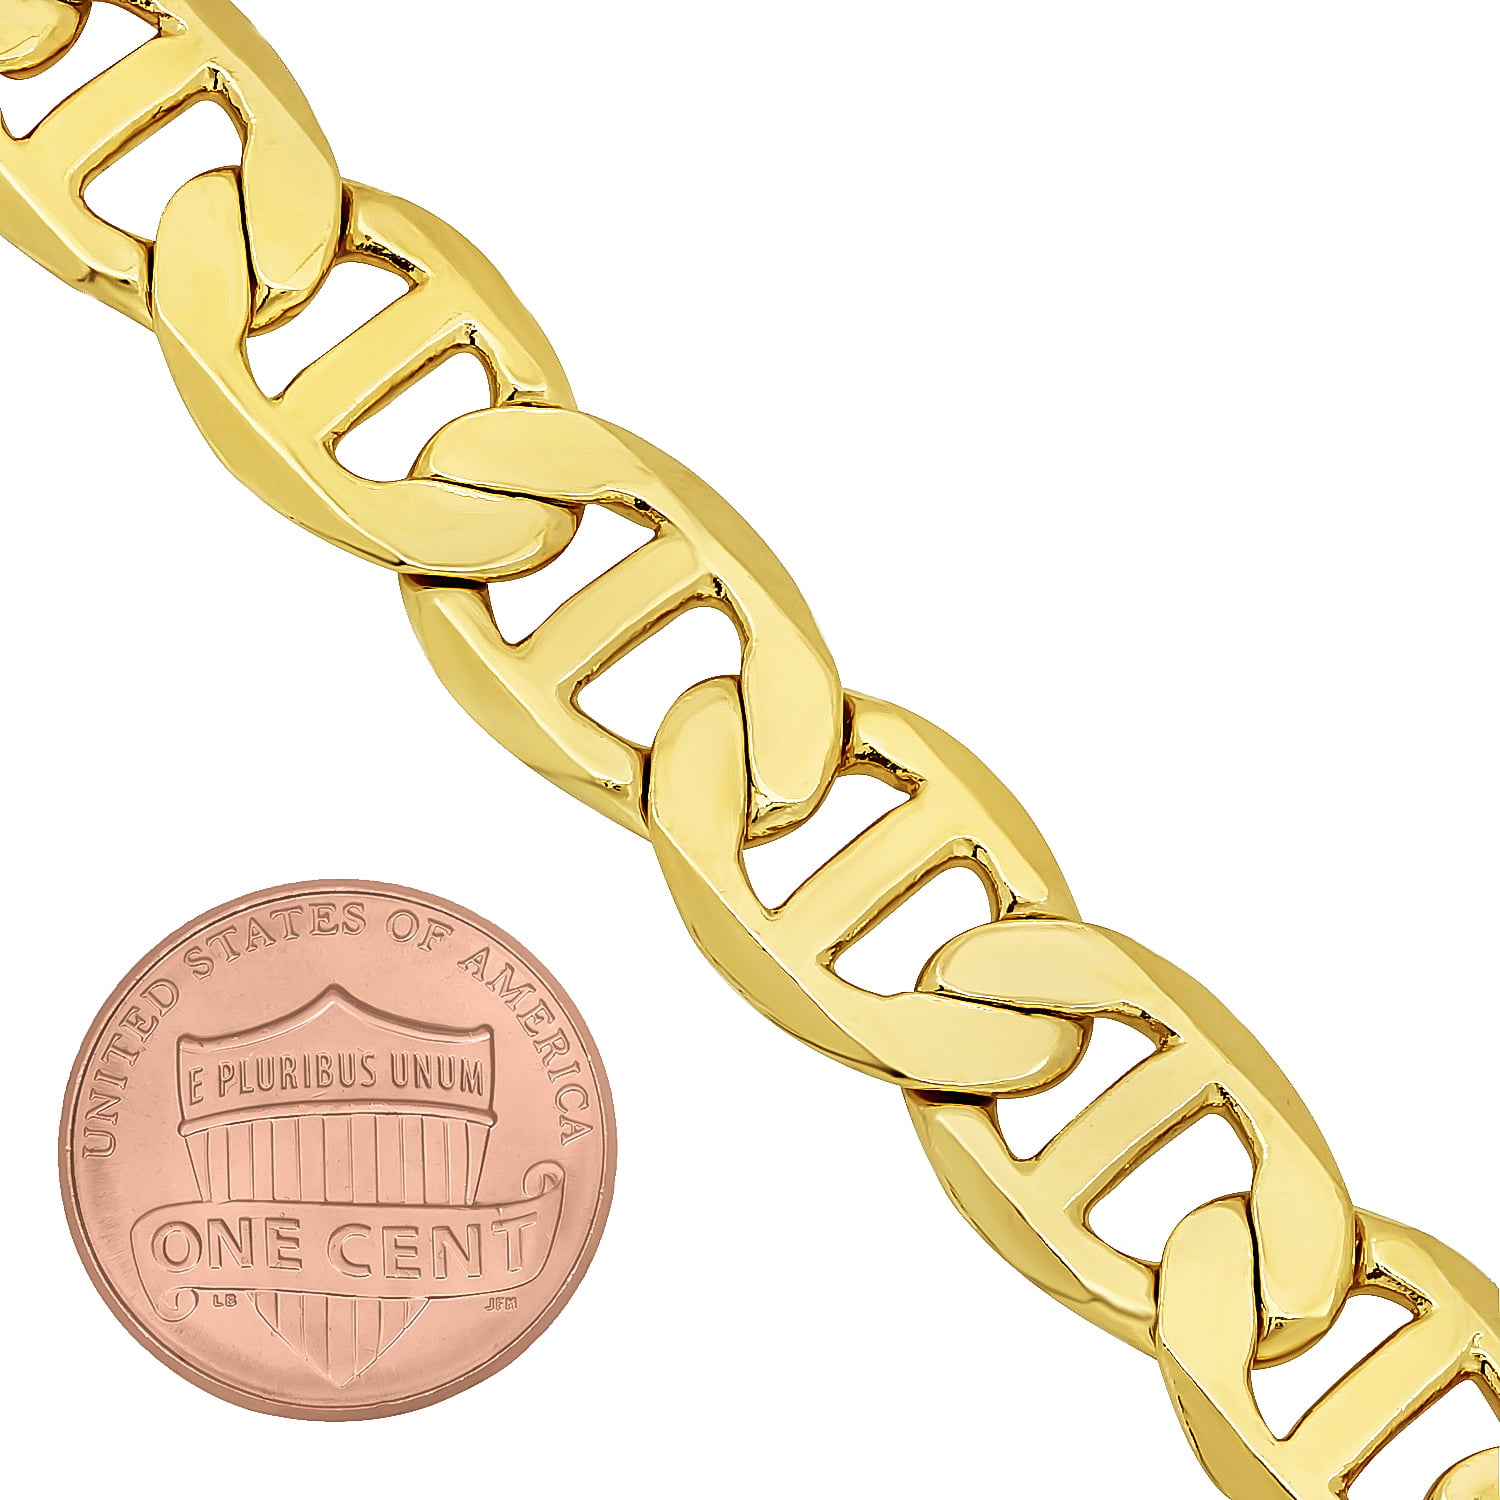 The Bling Factory - 12mm 14k Yellow Gold Plated Flat Mariner Chain 